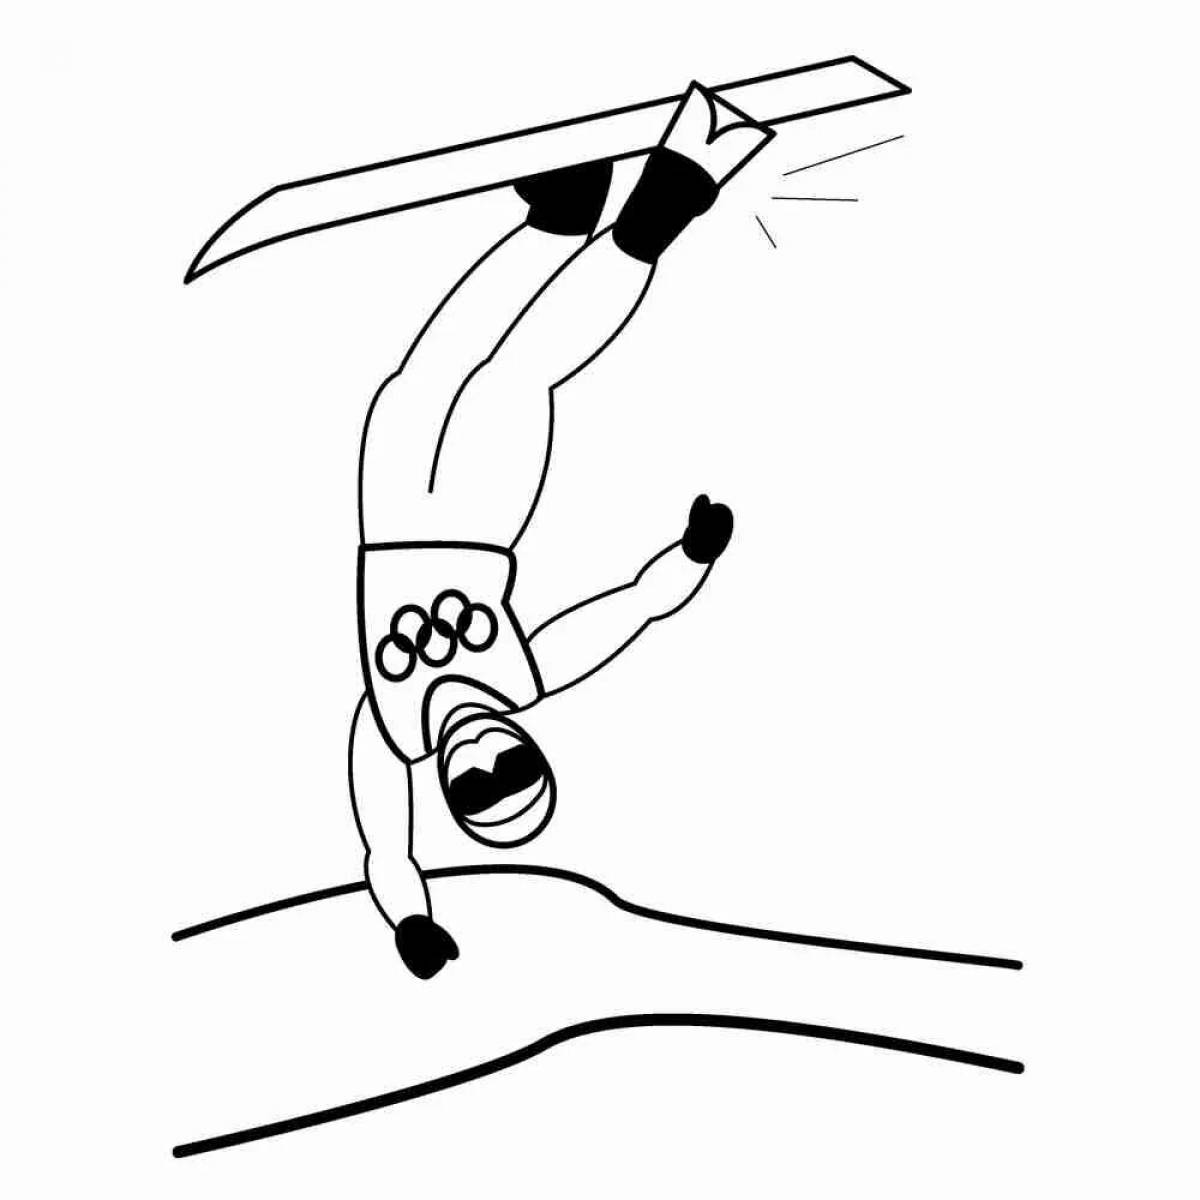 Creative coloring book for children's olympic sports